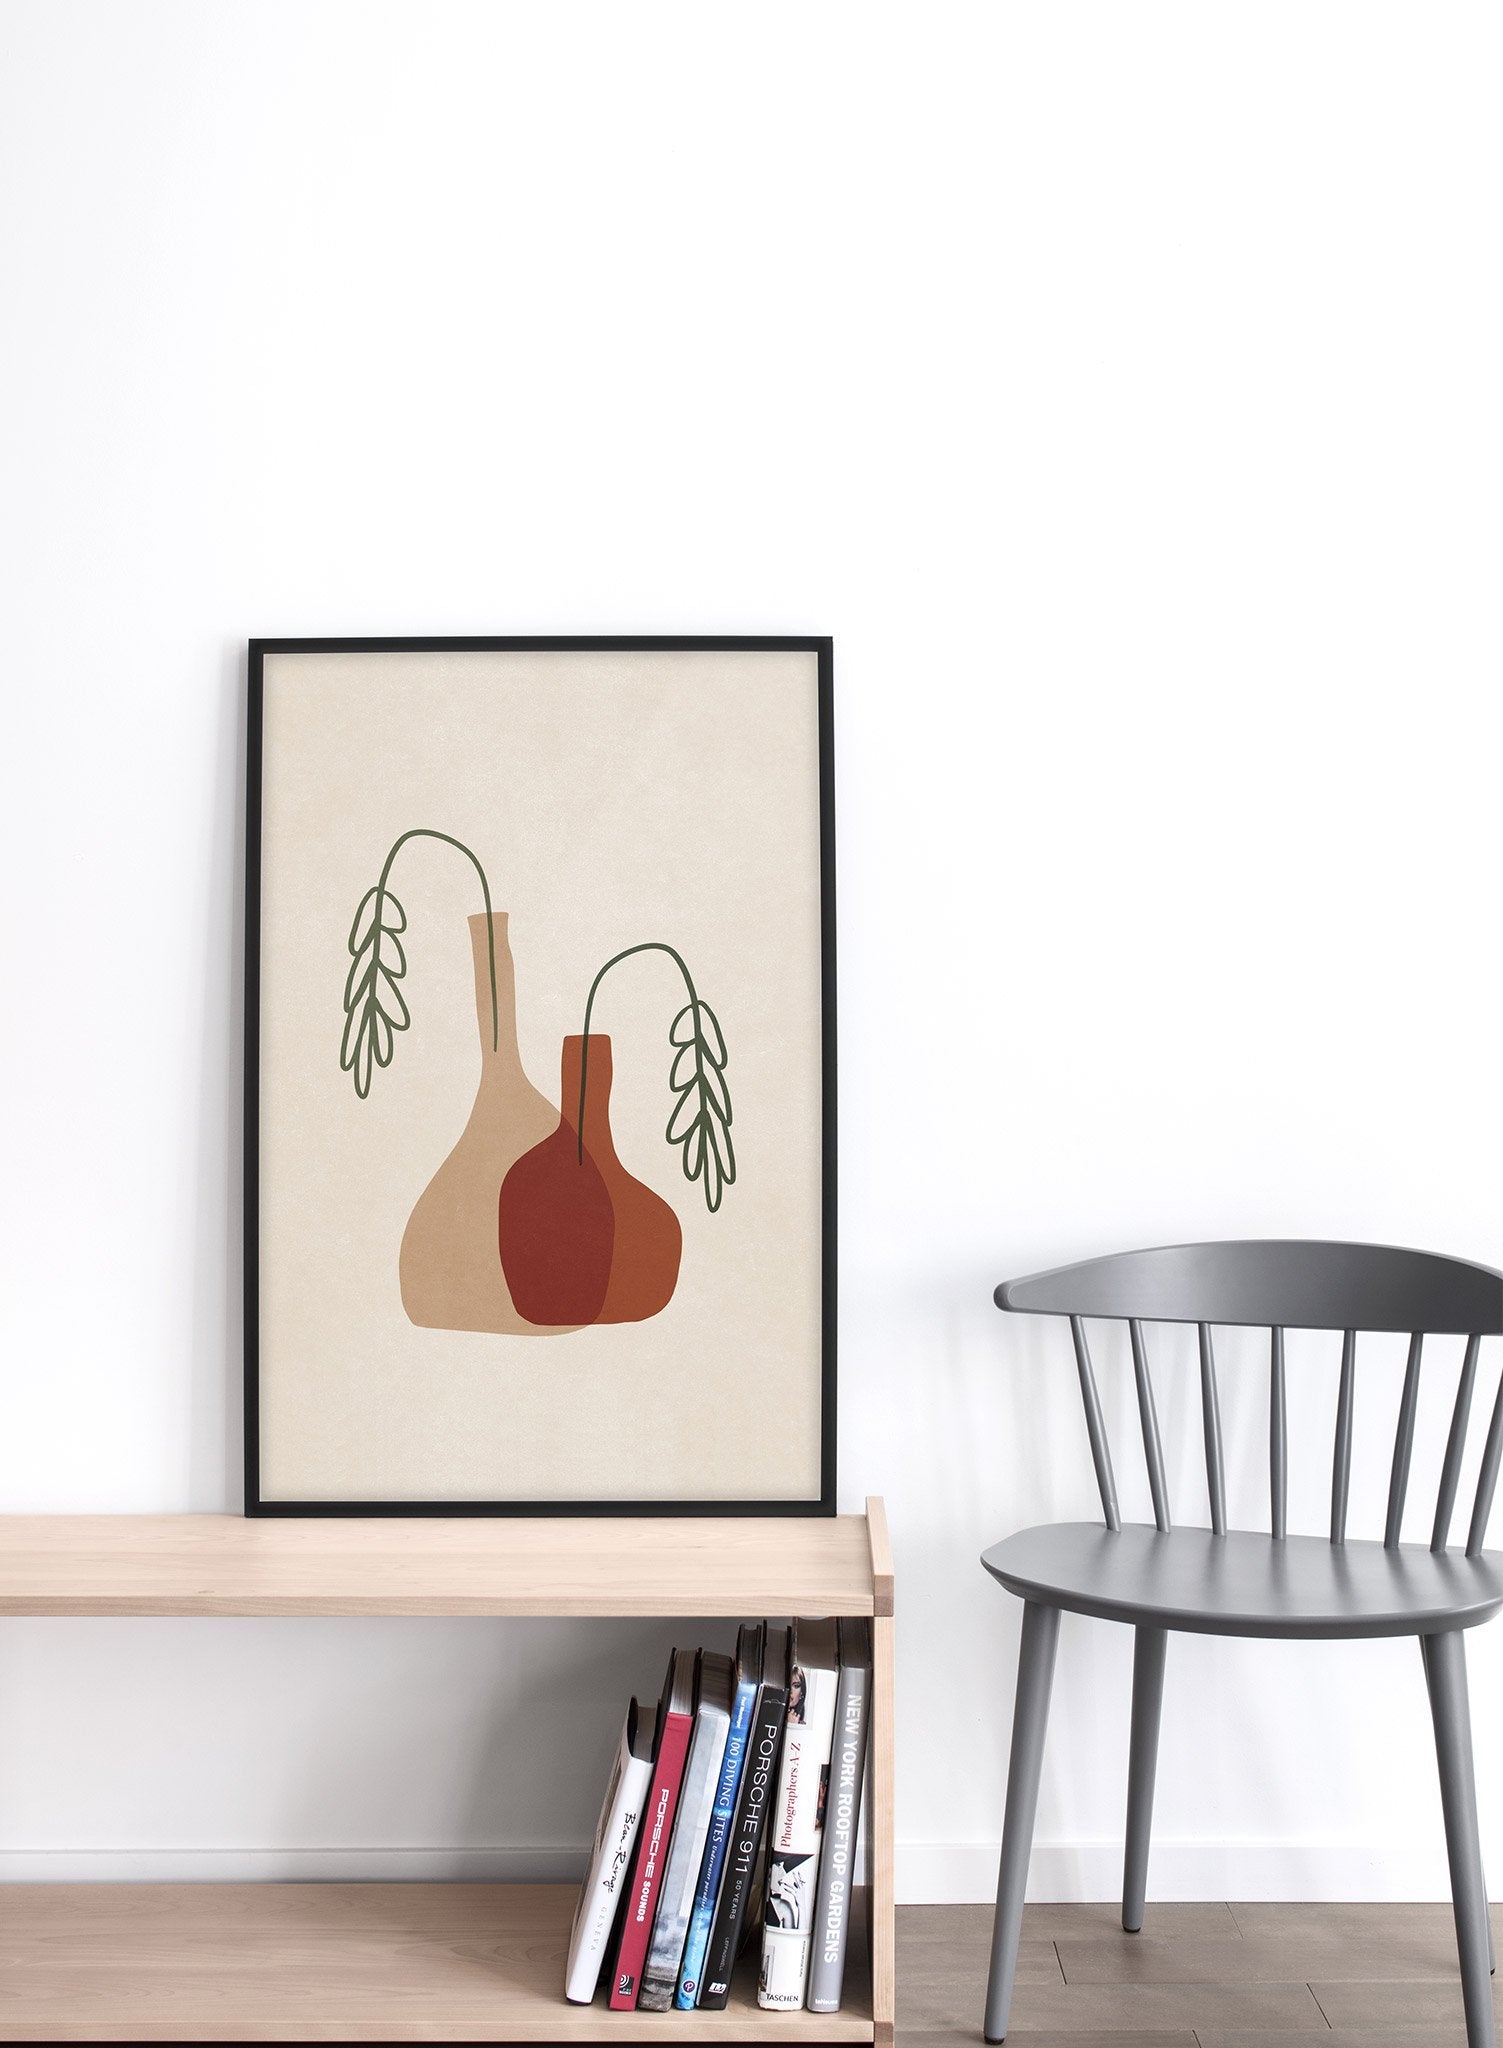 Modern minimalist illustration poster by Opposite Wall with vases and wilted leaves - Lifestyle - Living Room